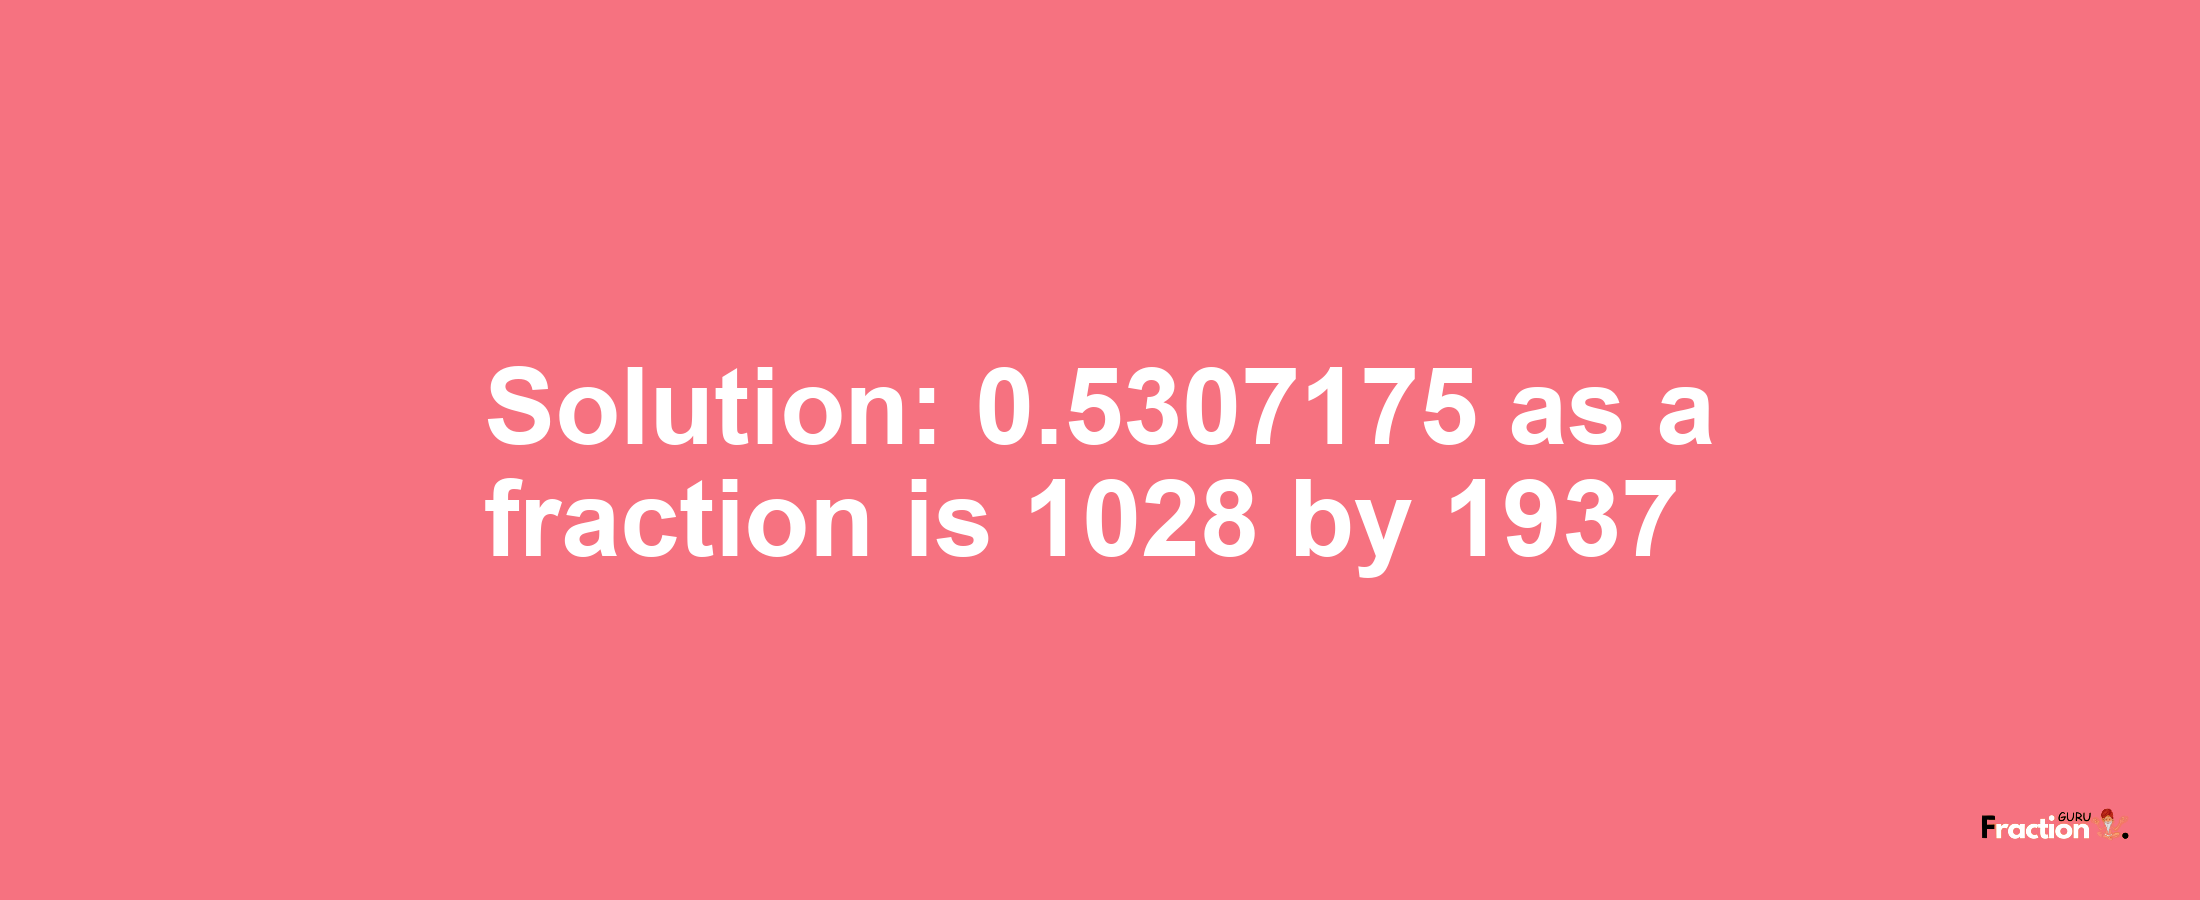 Solution:0.5307175 as a fraction is 1028/1937